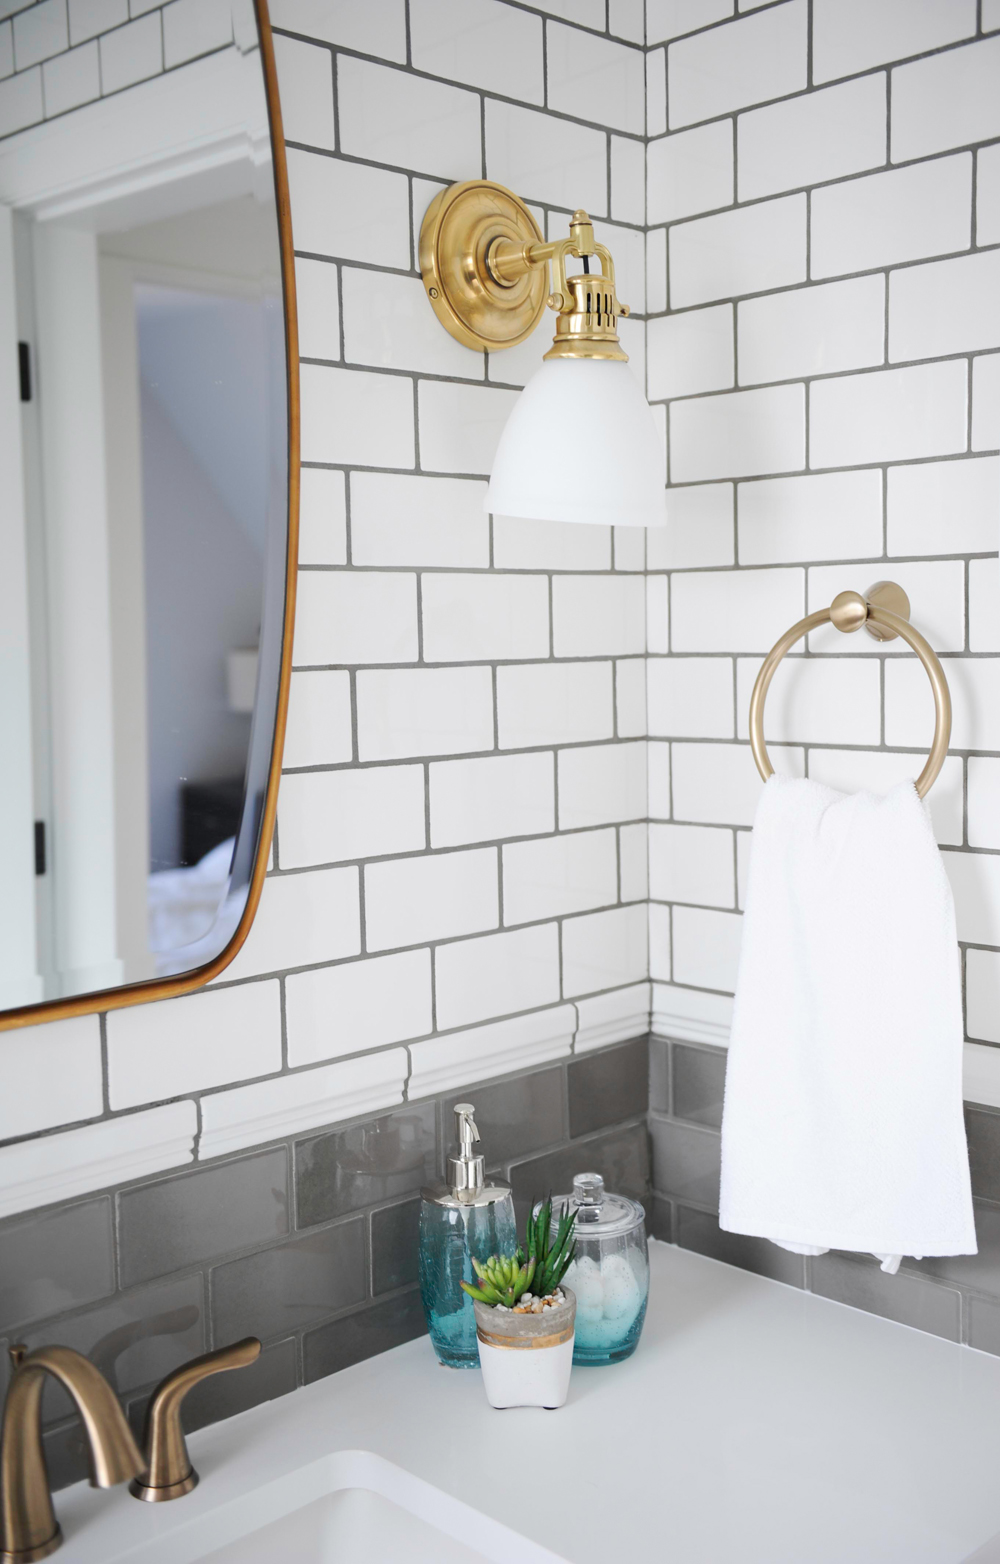 brass and copper bath sconces, handtowel holder and mirror fixtures and grey and white subway tiles